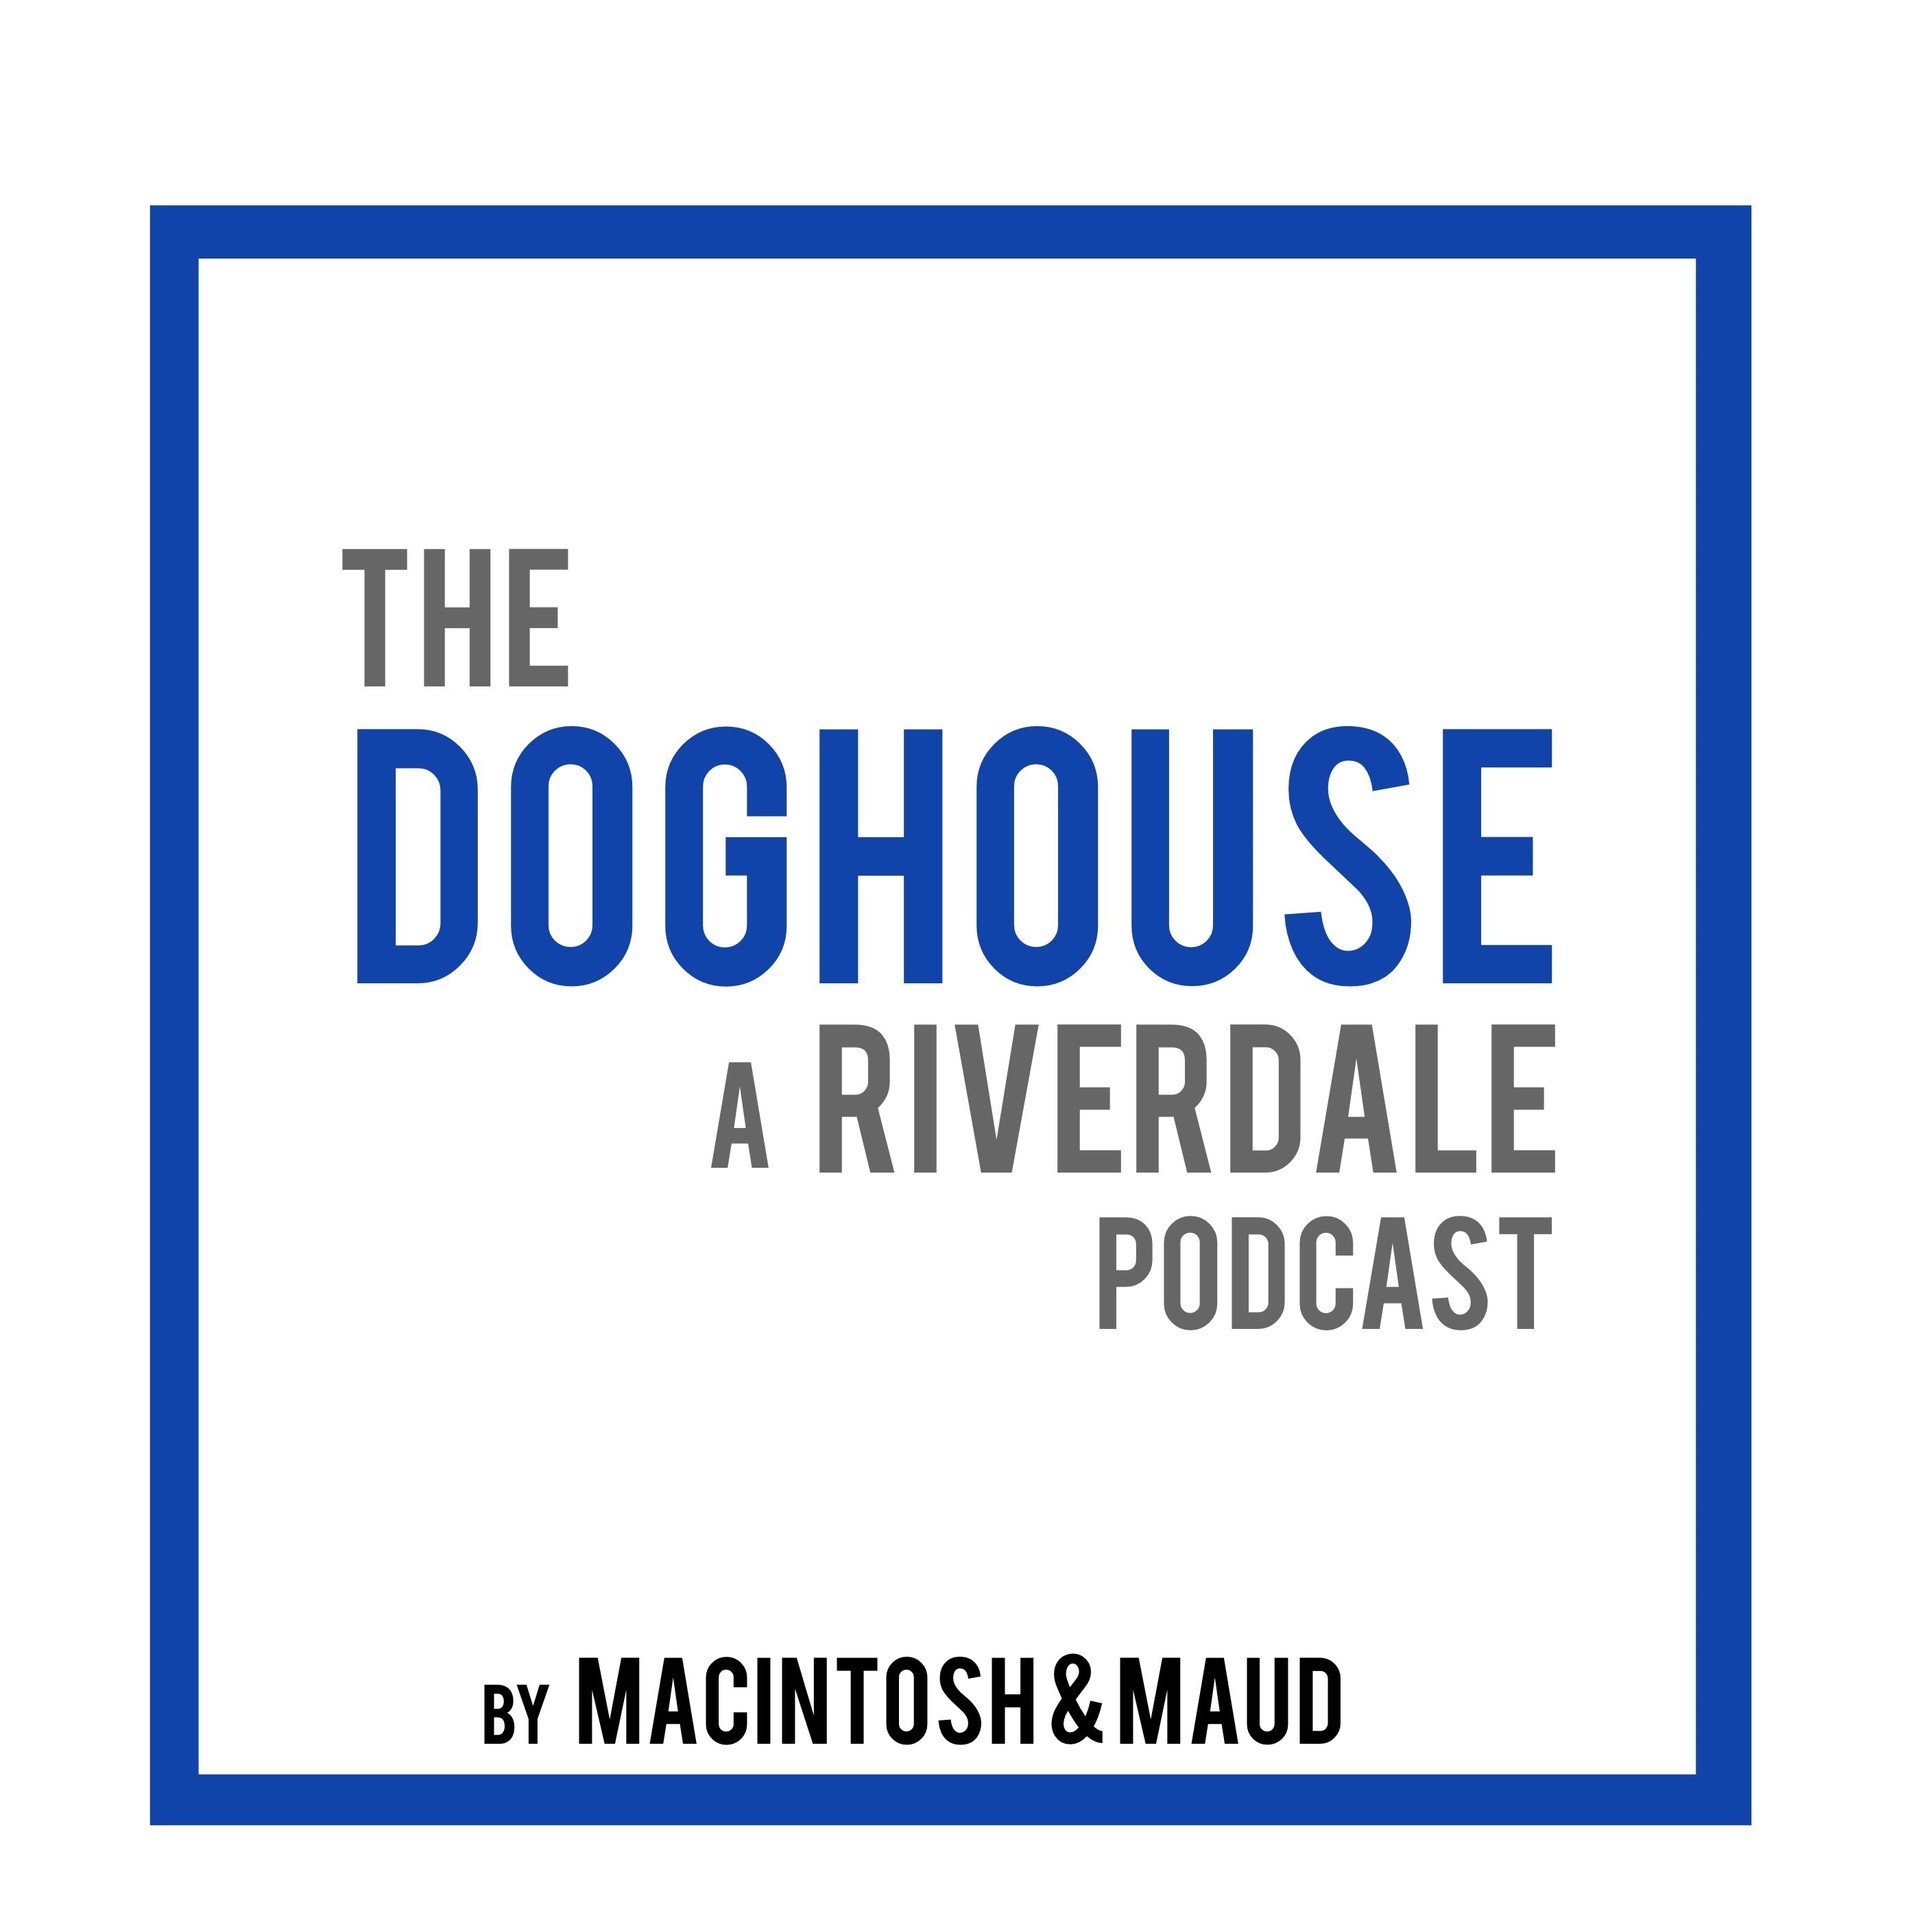 The Doghouse: A Riverdale Podcast podcast show image